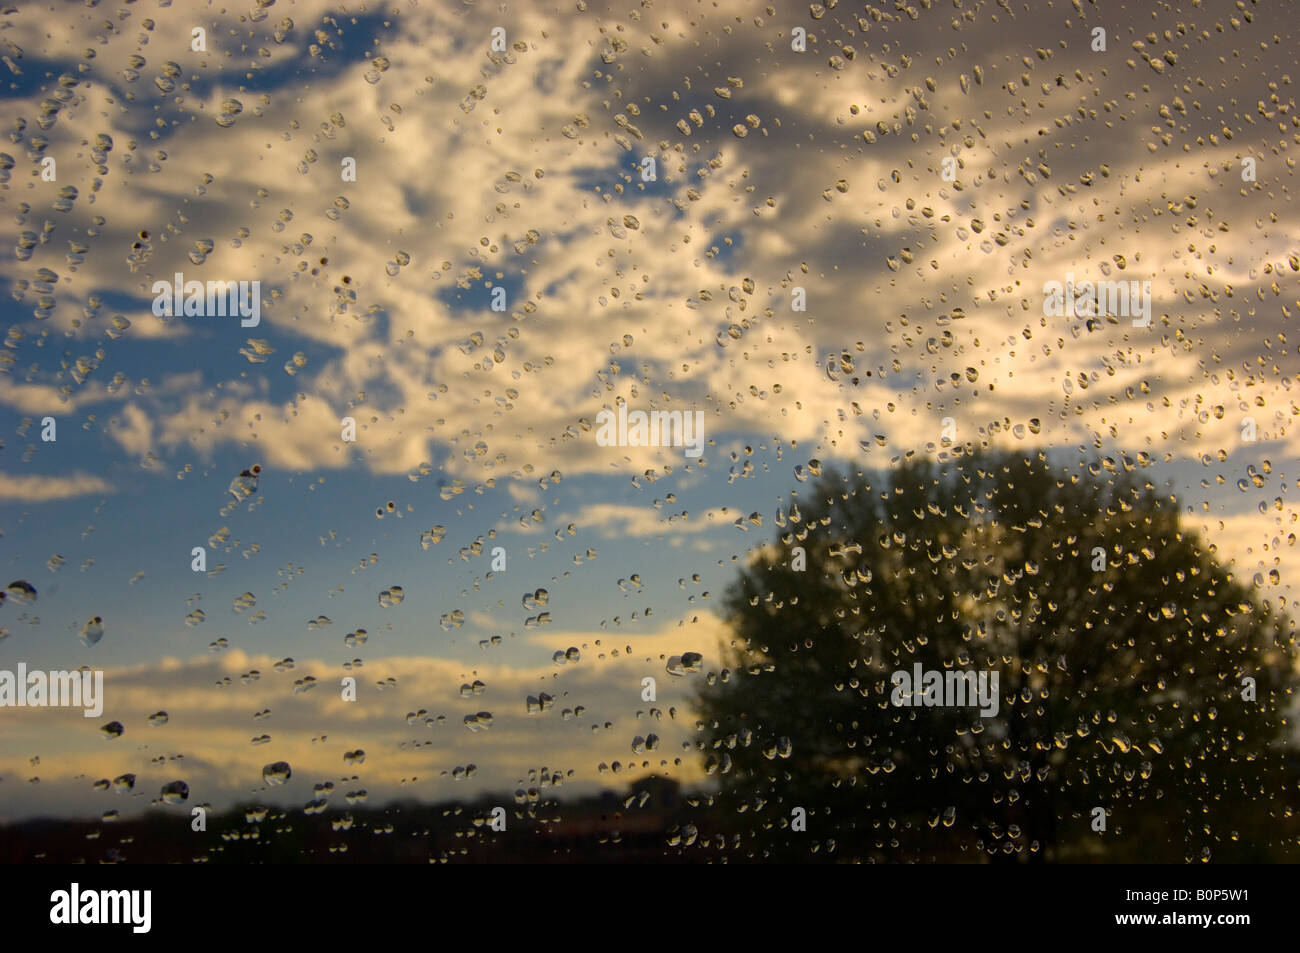 window with rain drops reflecting a landscape of clouds and tree Stock Photo